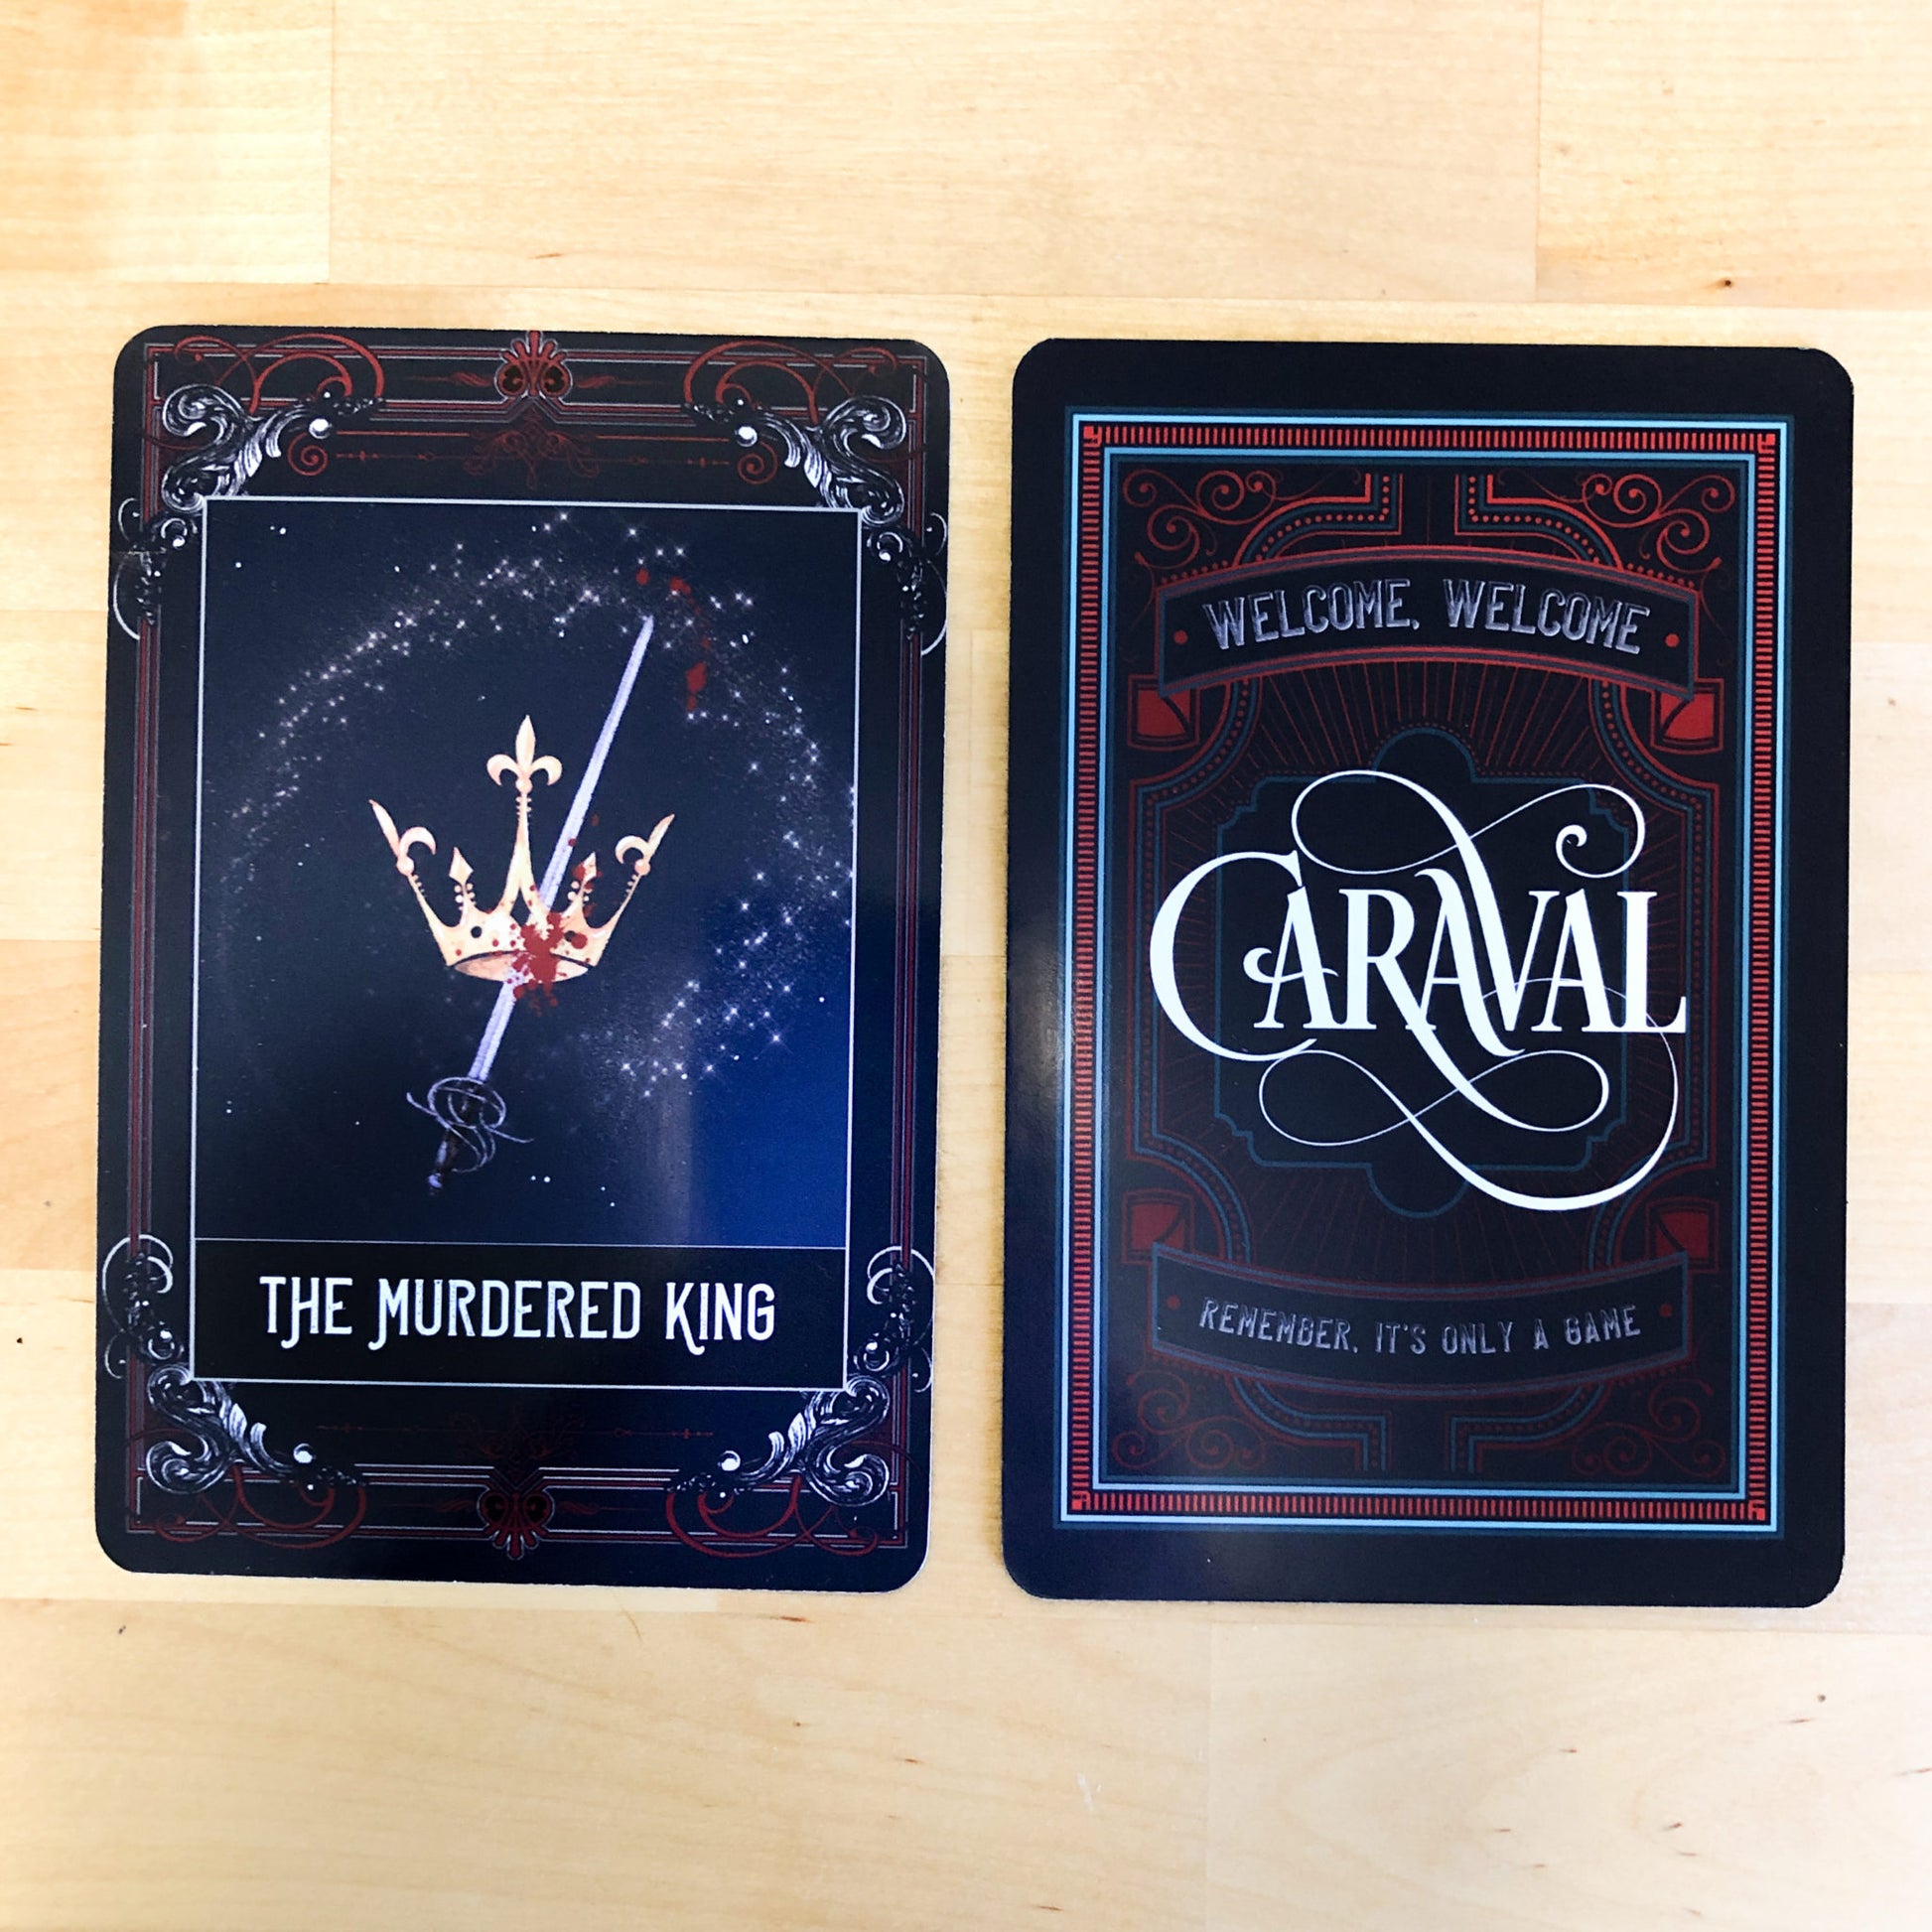 Caraval themed "tarot" card (The Murdered King)